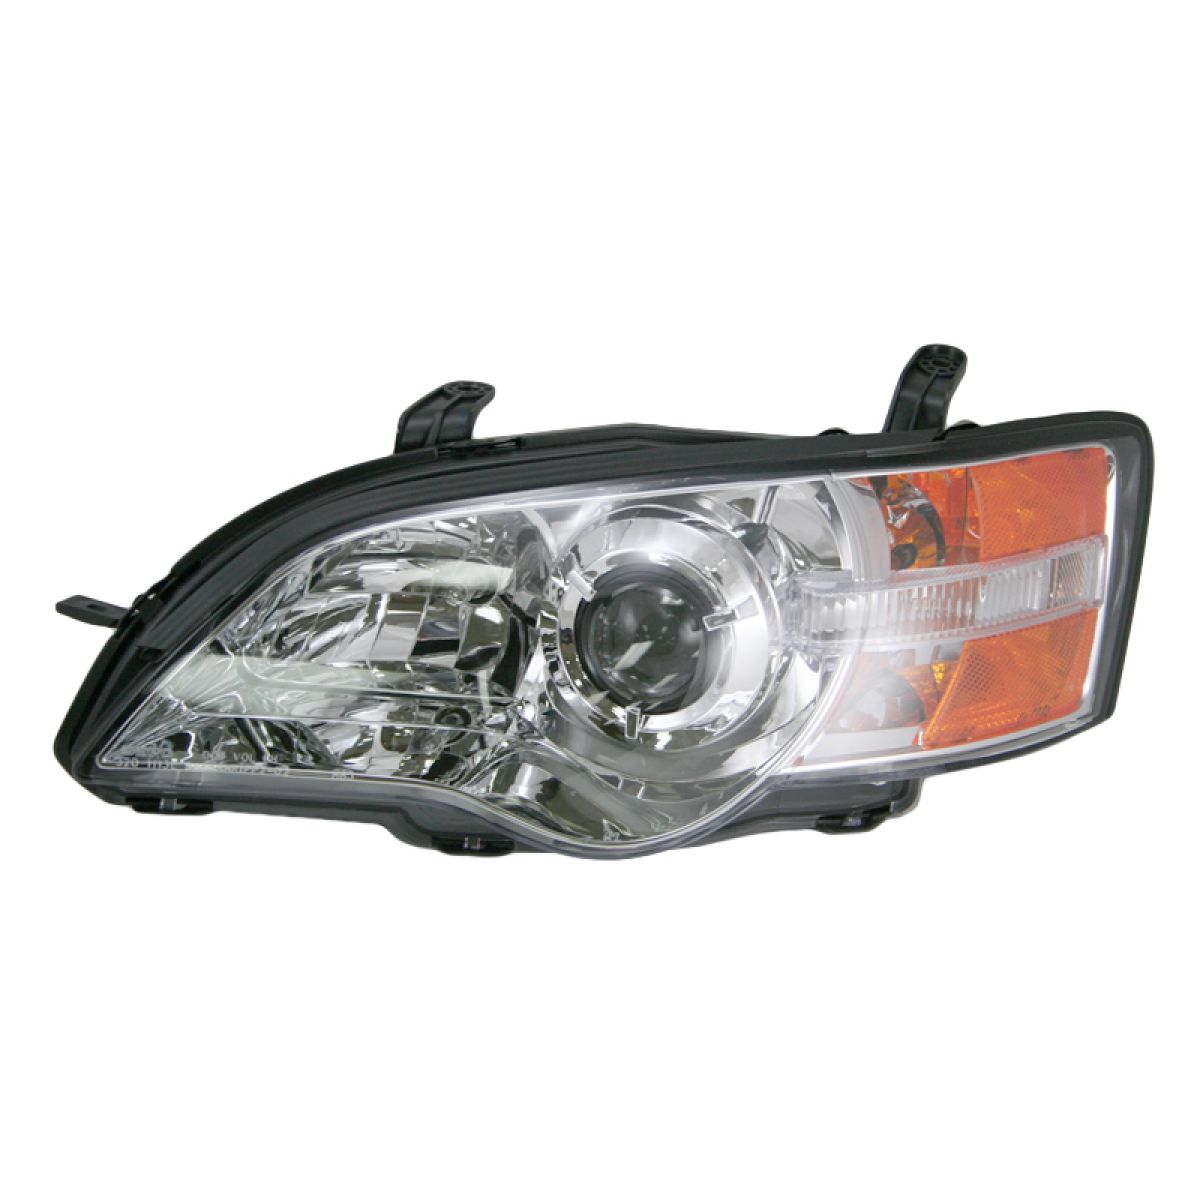 Headlight Headlamp Driver Side LH Left for 06-07 Subaru Outback Legacy ...